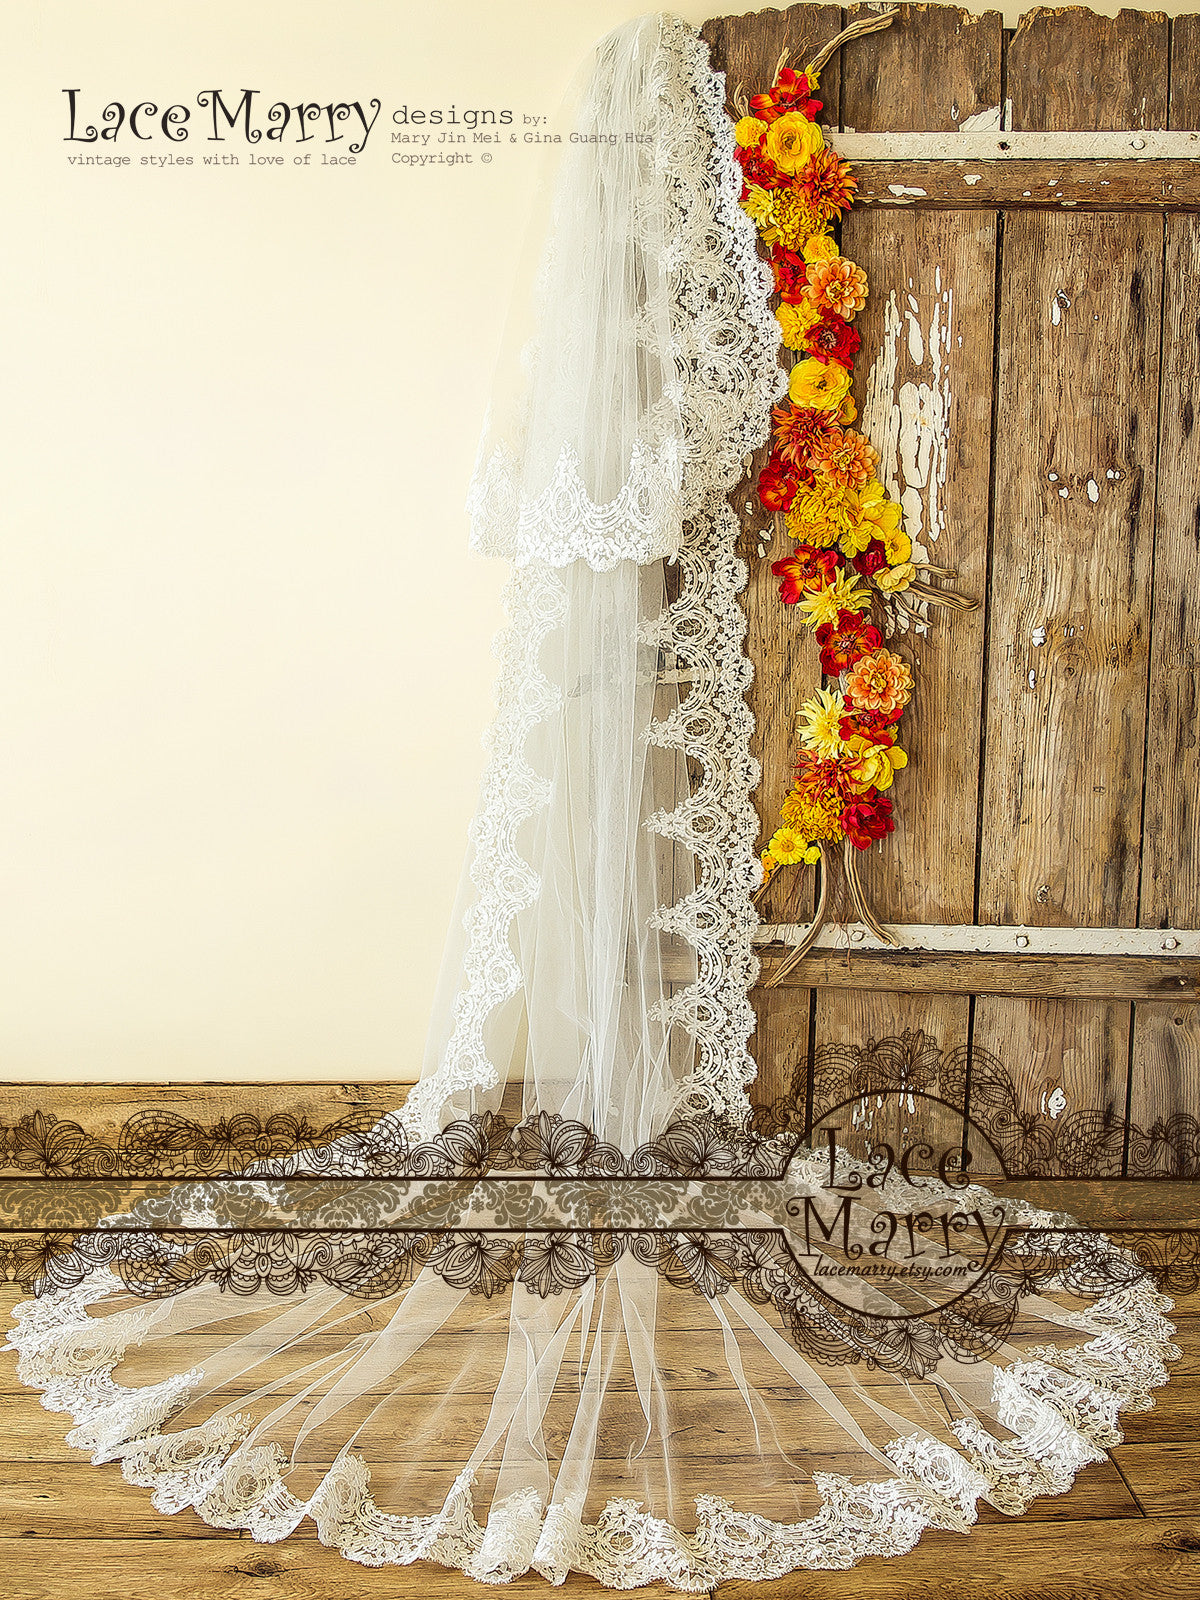 White Lace Wedding Veil Cathedral Length Veil - VQ